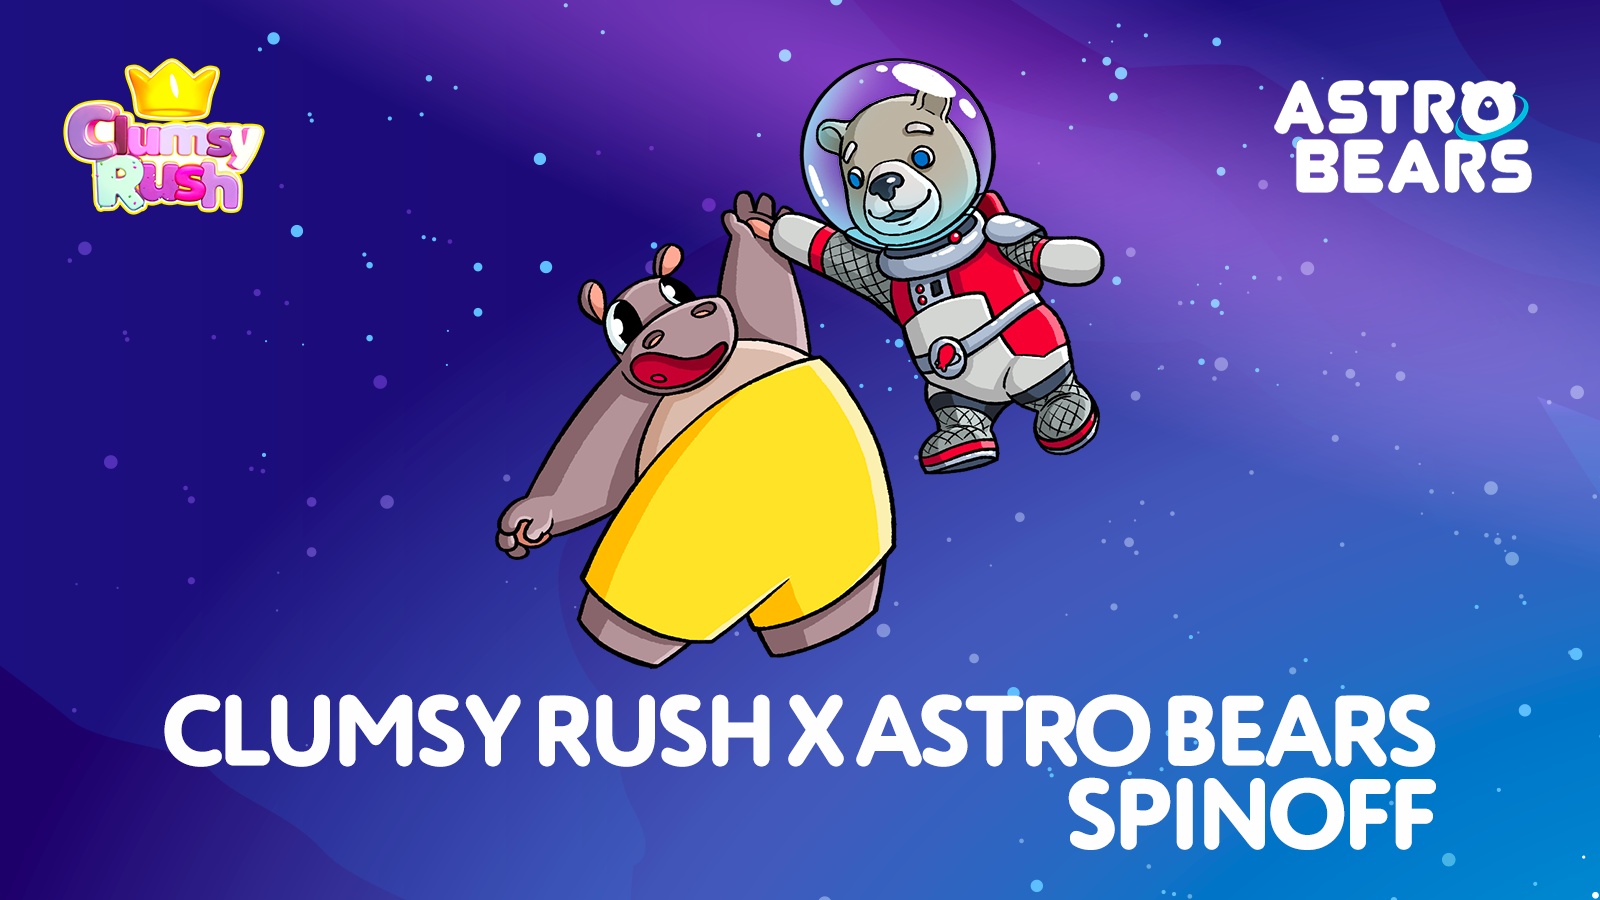 clumsy rush x astro bears spinoff - Nintendo Switch, Xbox, Playstation